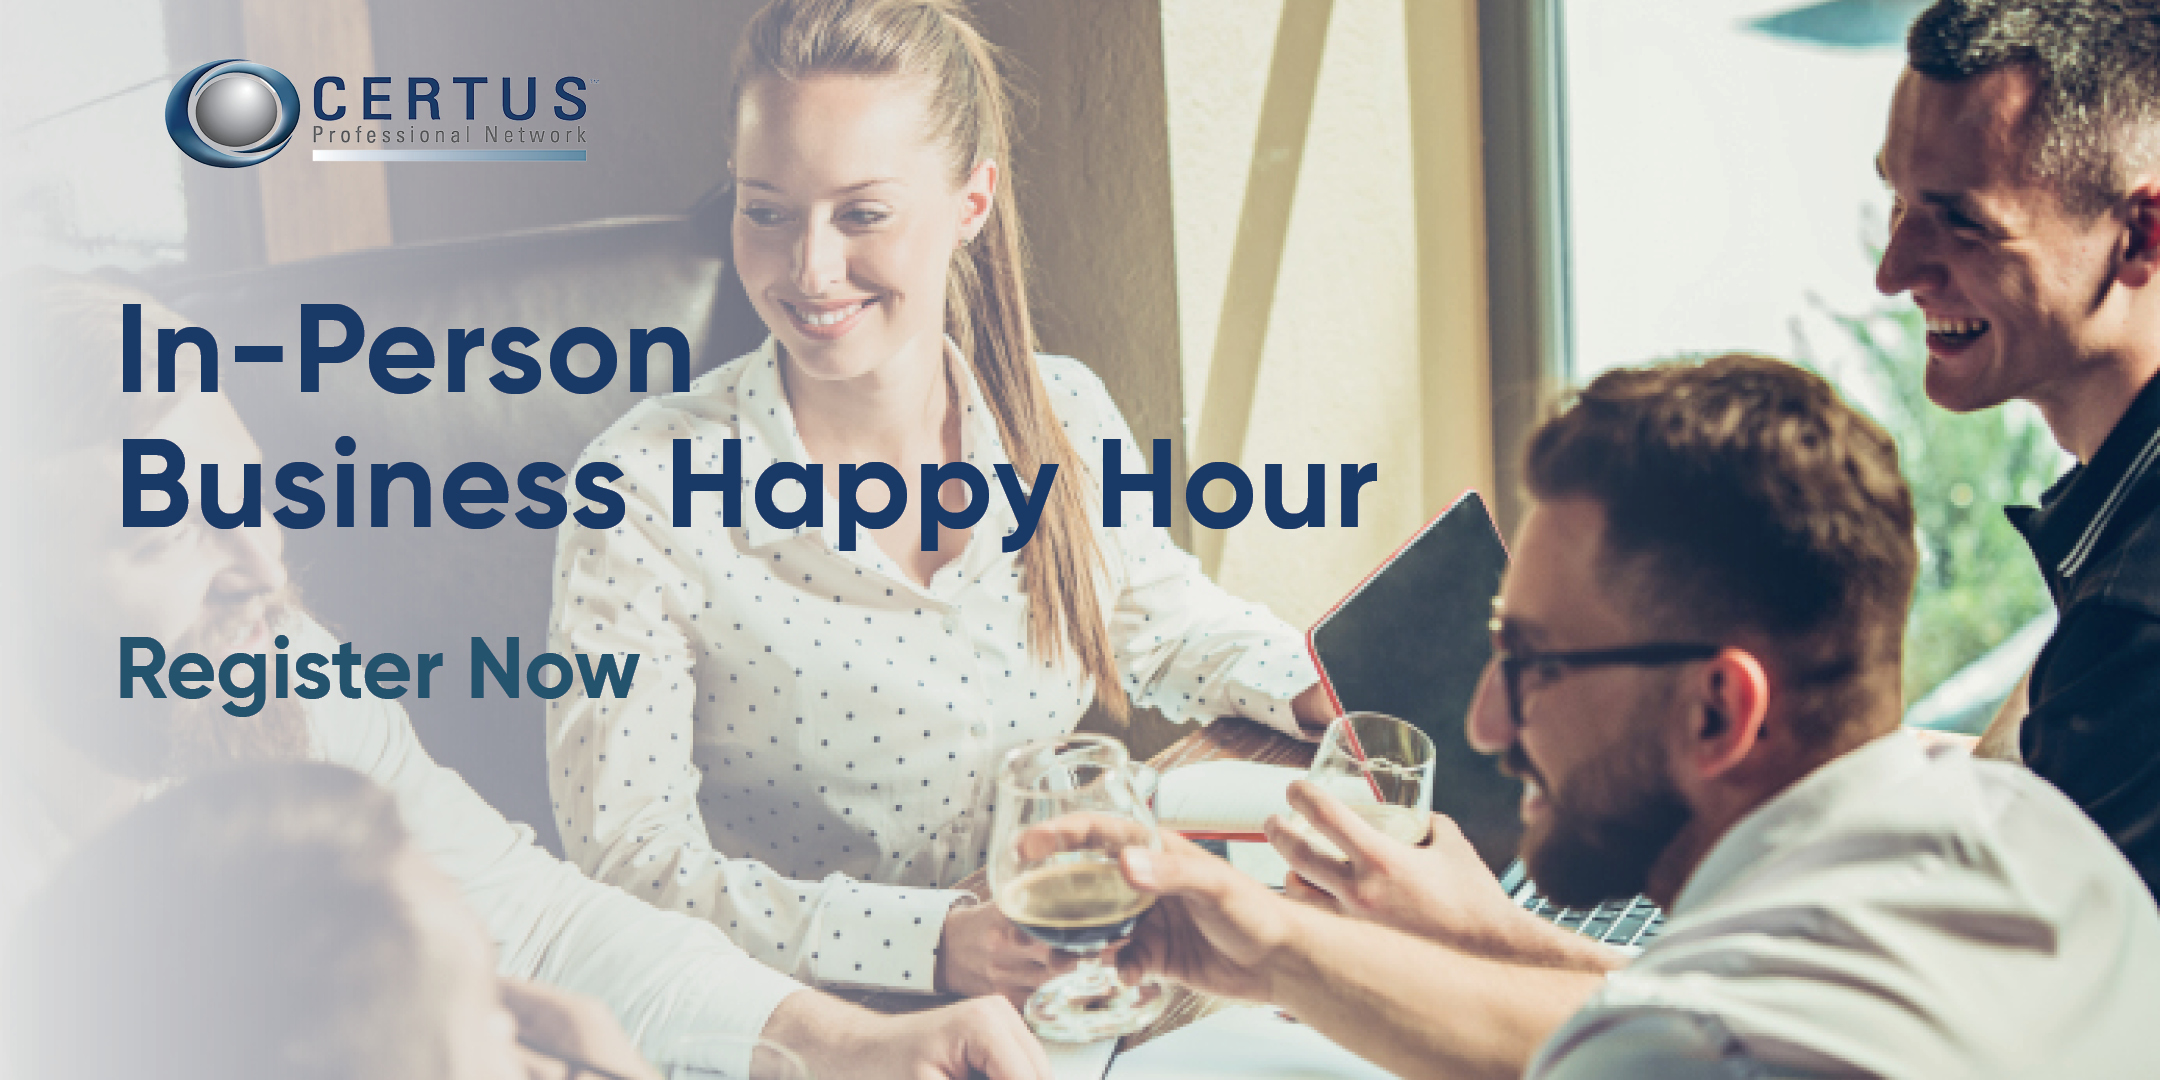 In-Person Business Happy Hour